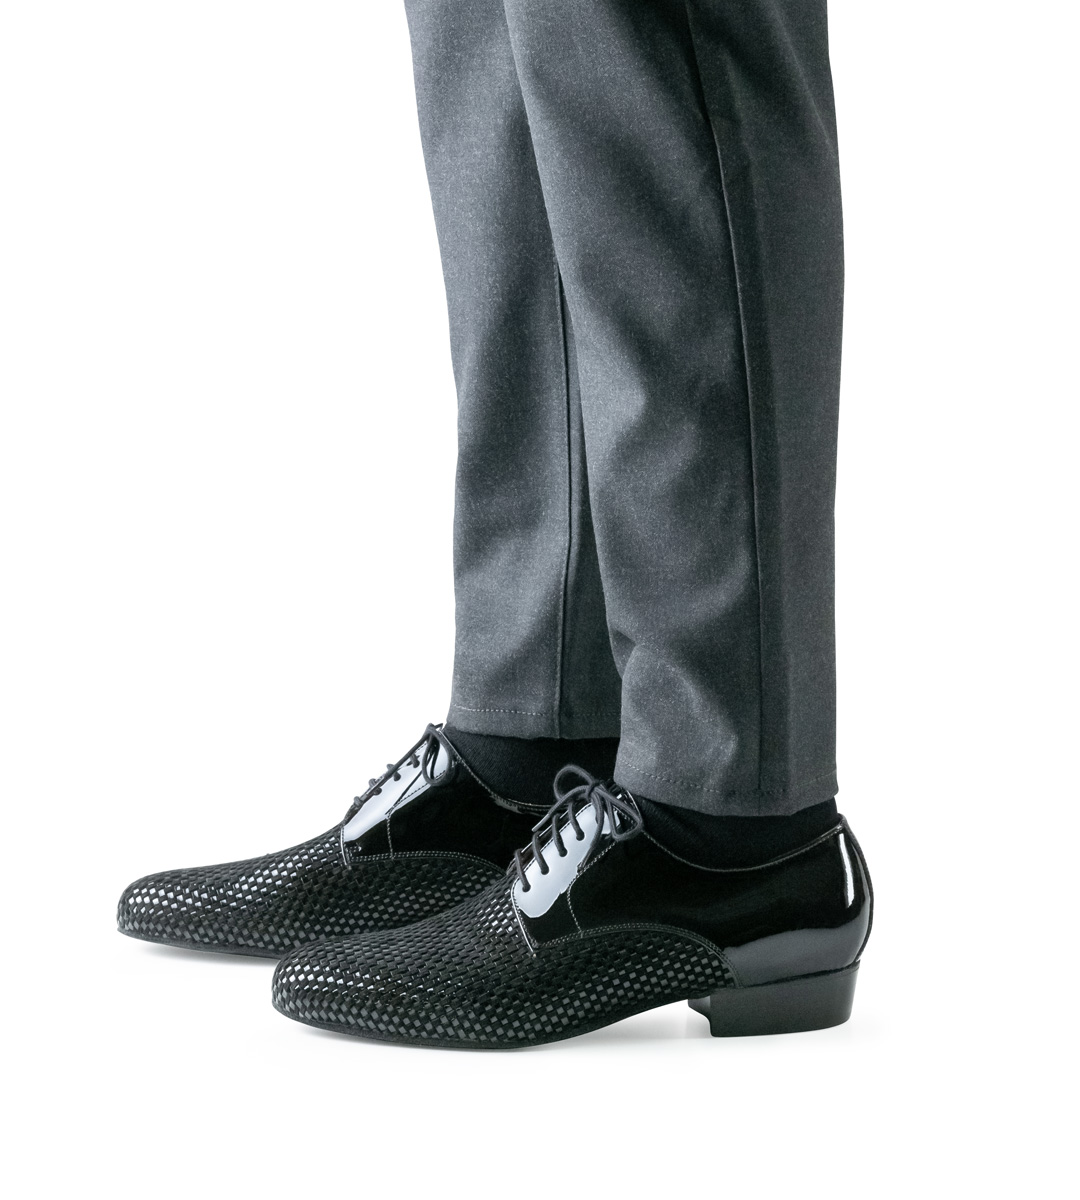 Nueva Epoca Men's Dance Shoe with Weave in Patent and Velour in Combination with Grey Trousers